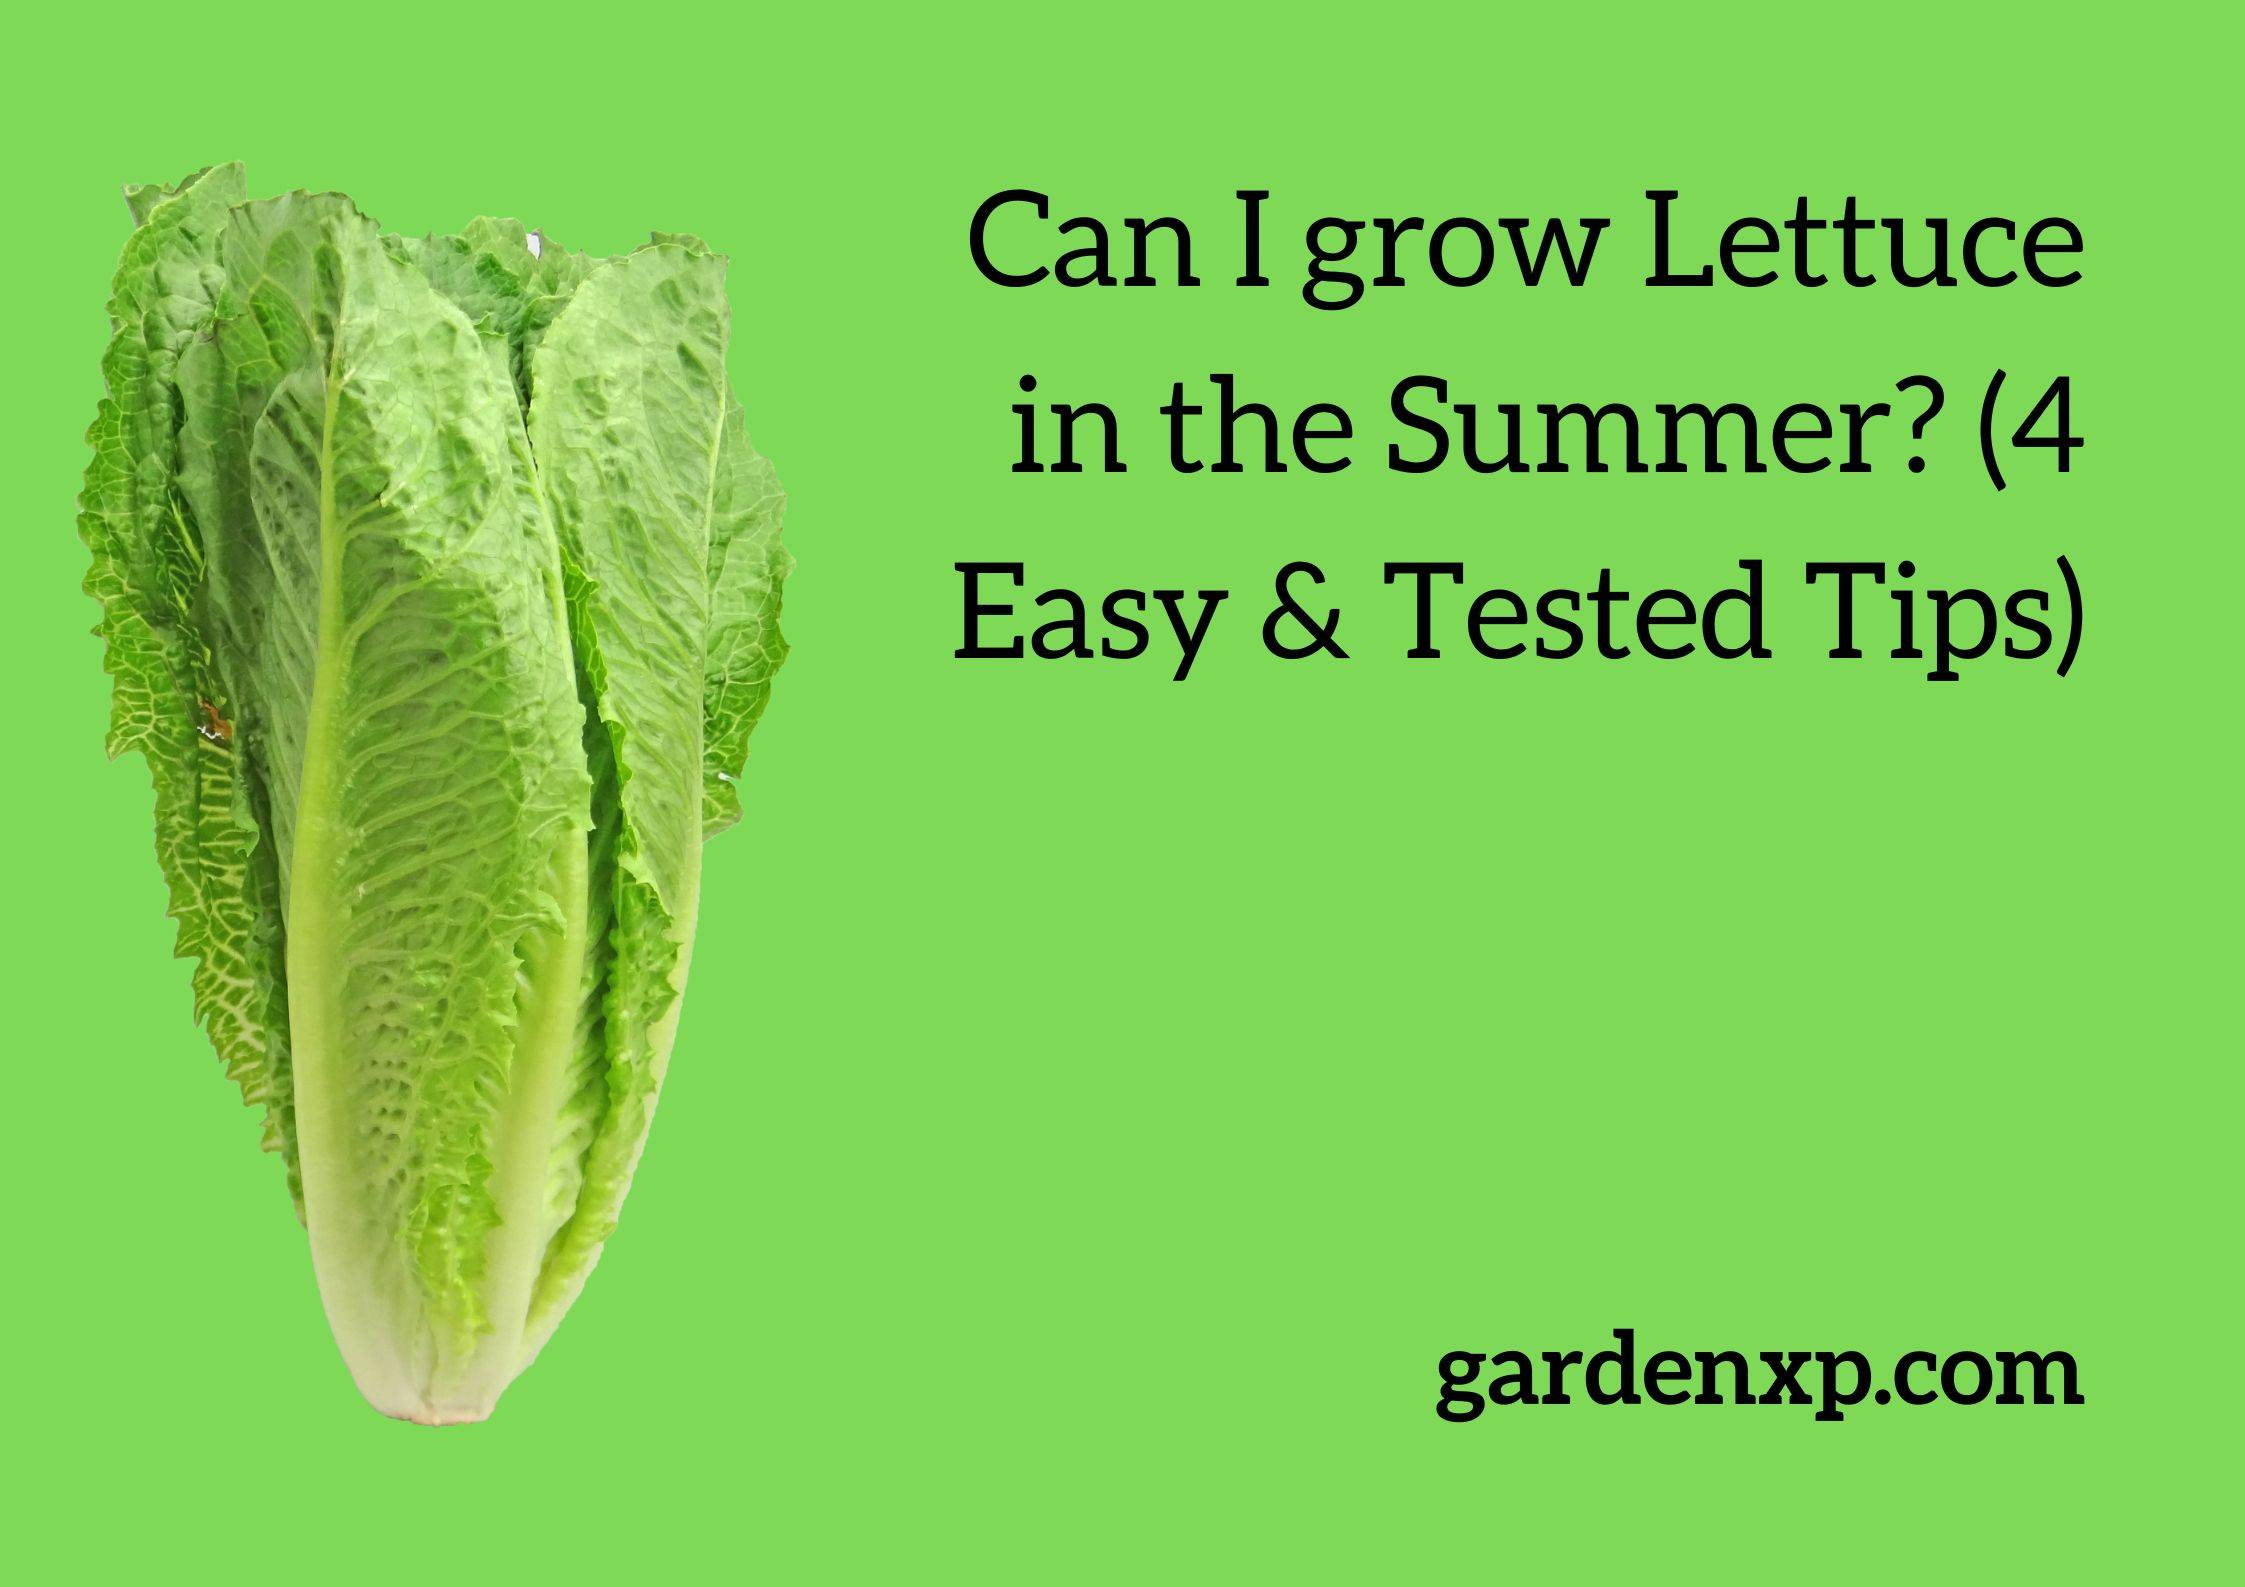 Can I grow Lettuce in the Summer? (4 Easy & Tested Tips)